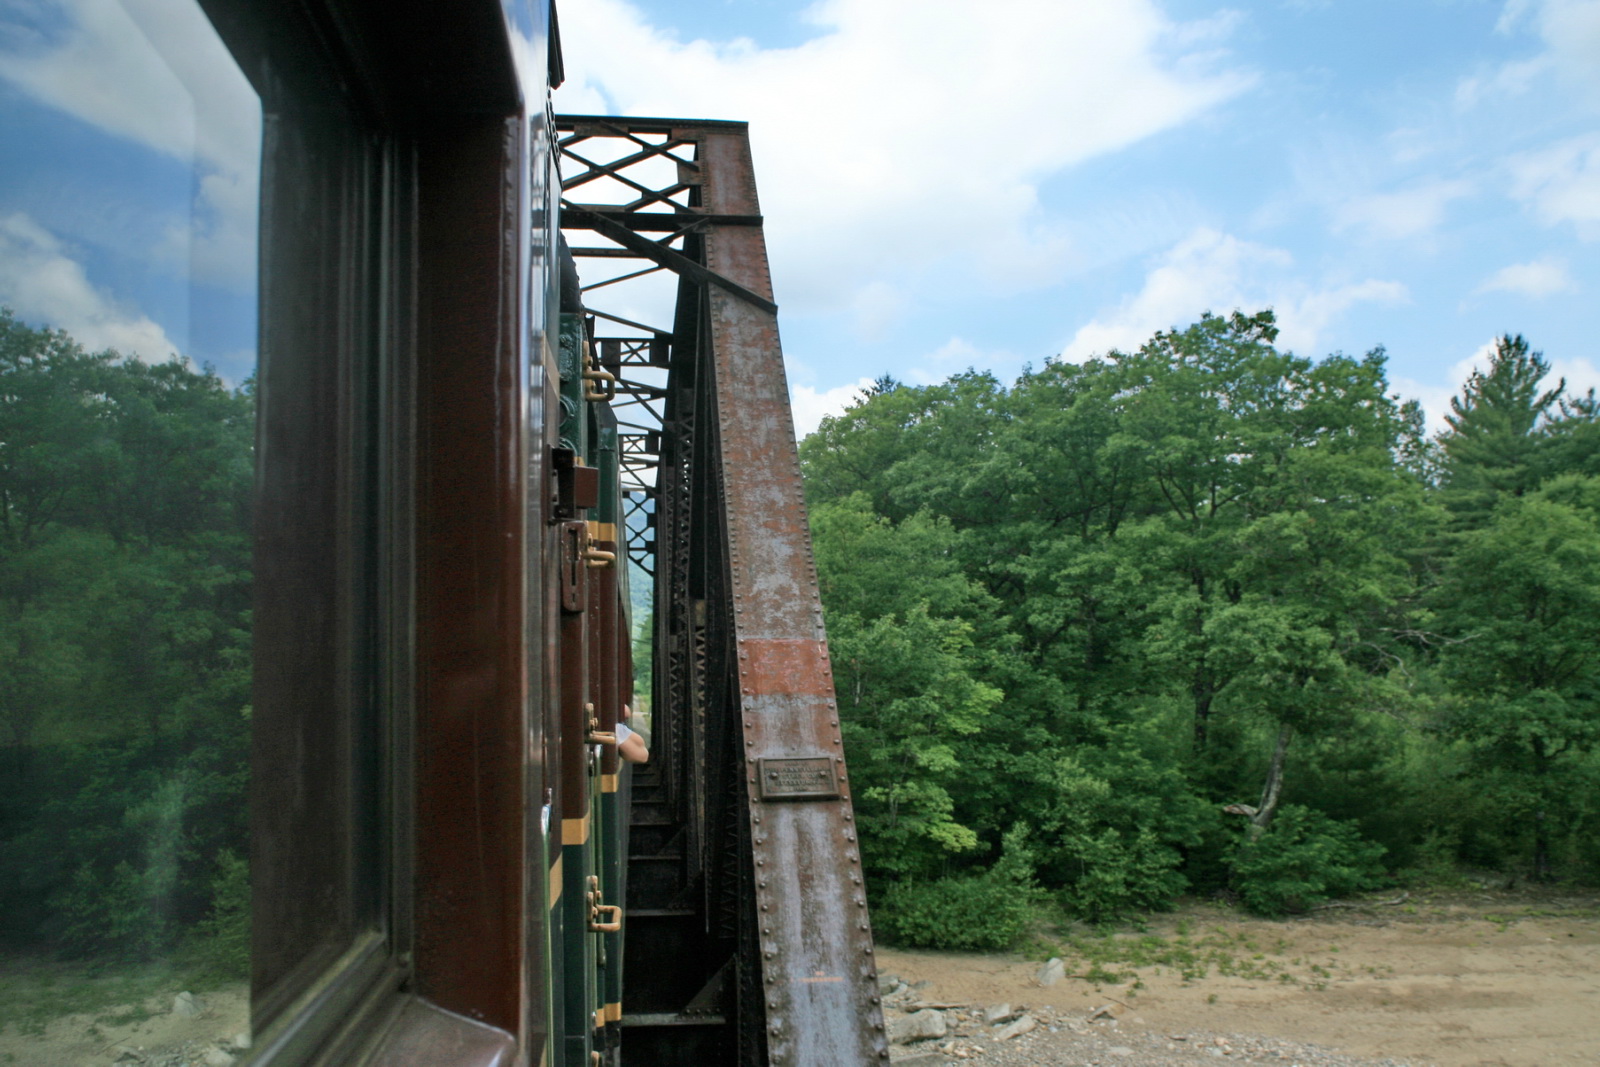 view from a train as it approaches a bridge